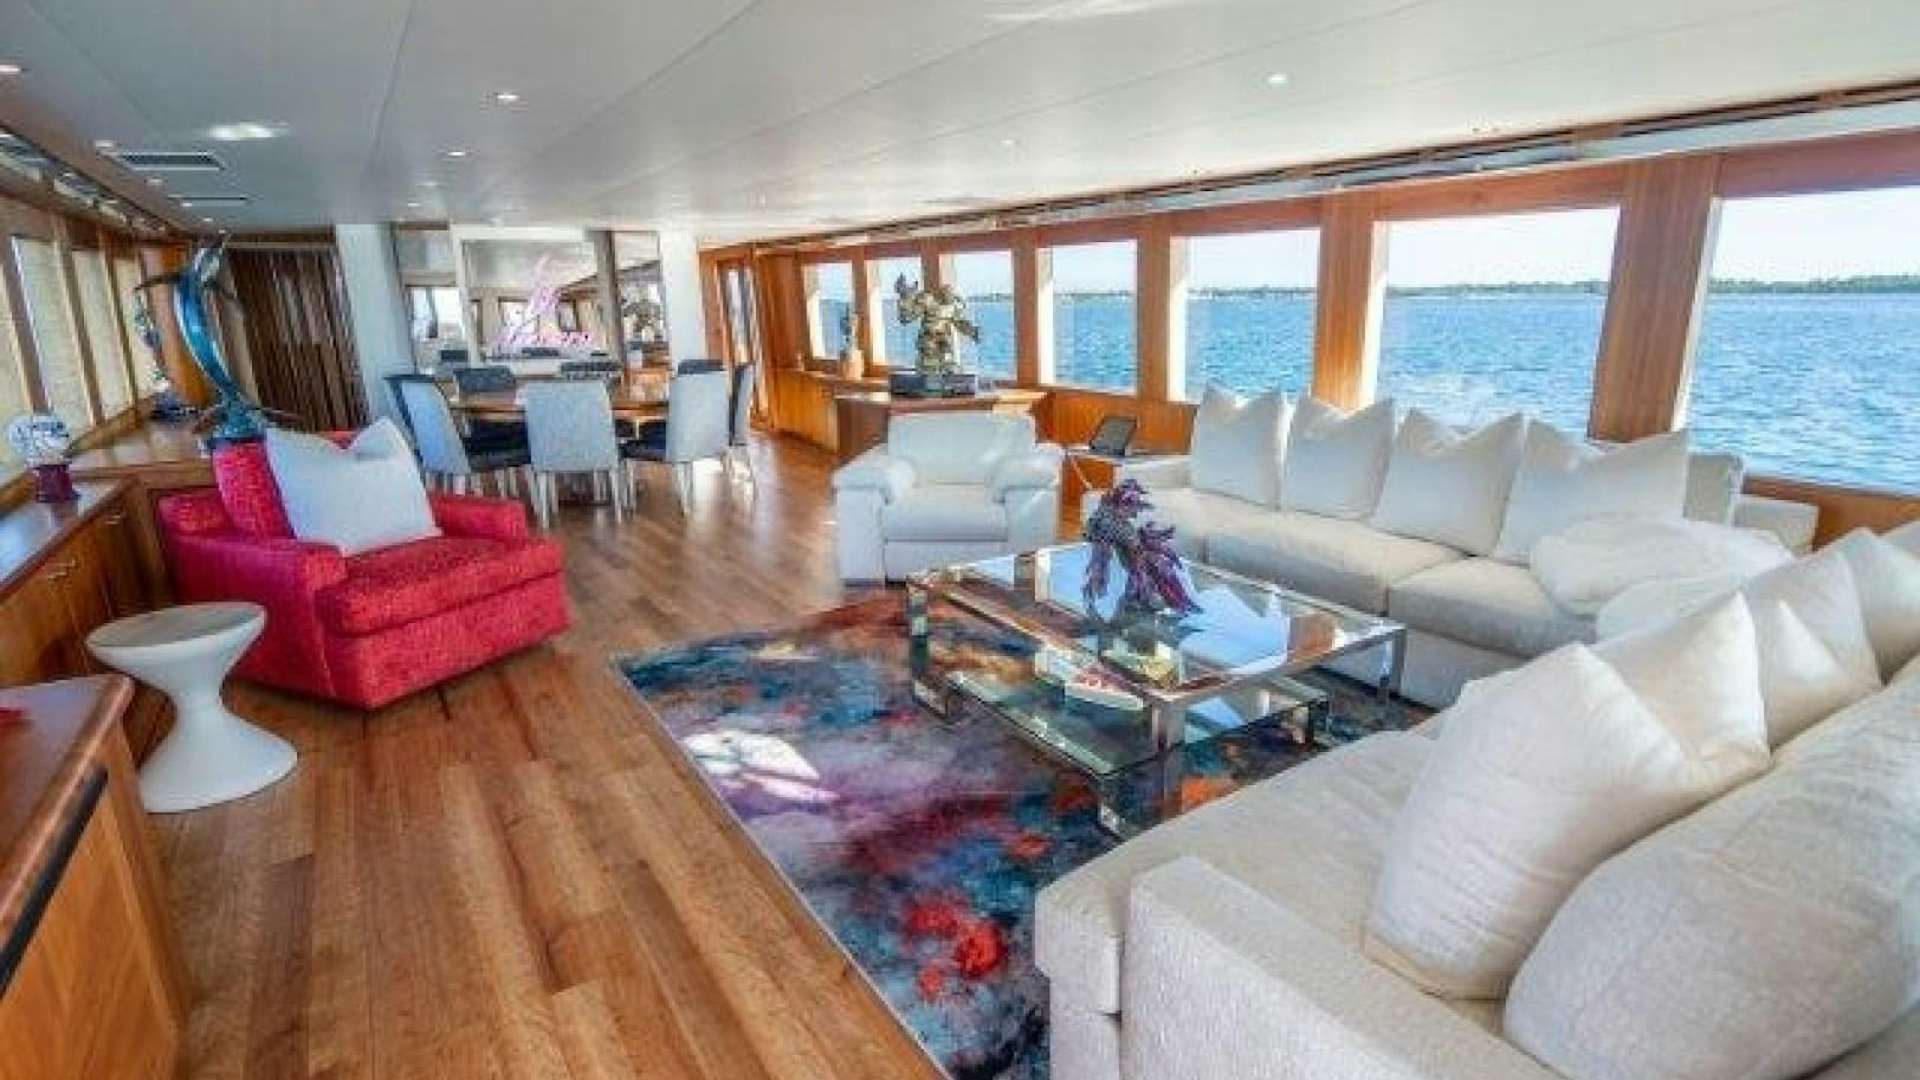 Centodue
Yacht for Sale